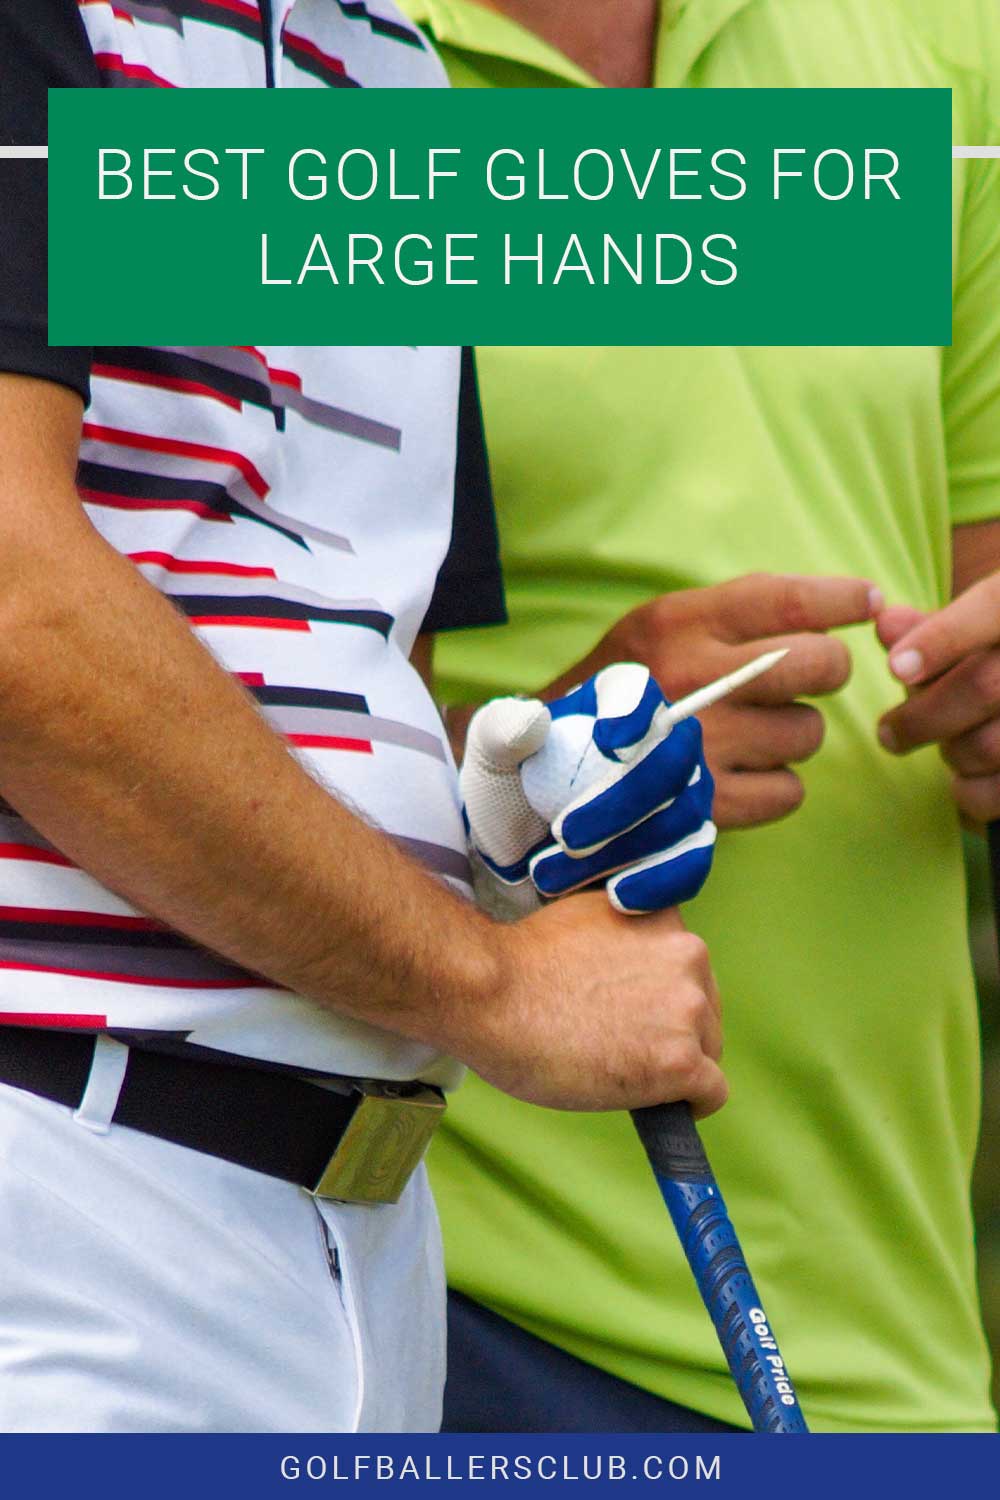 Person with a golf ball and a club in hand standing near another person - Best Golf Gloves For Large Hands.